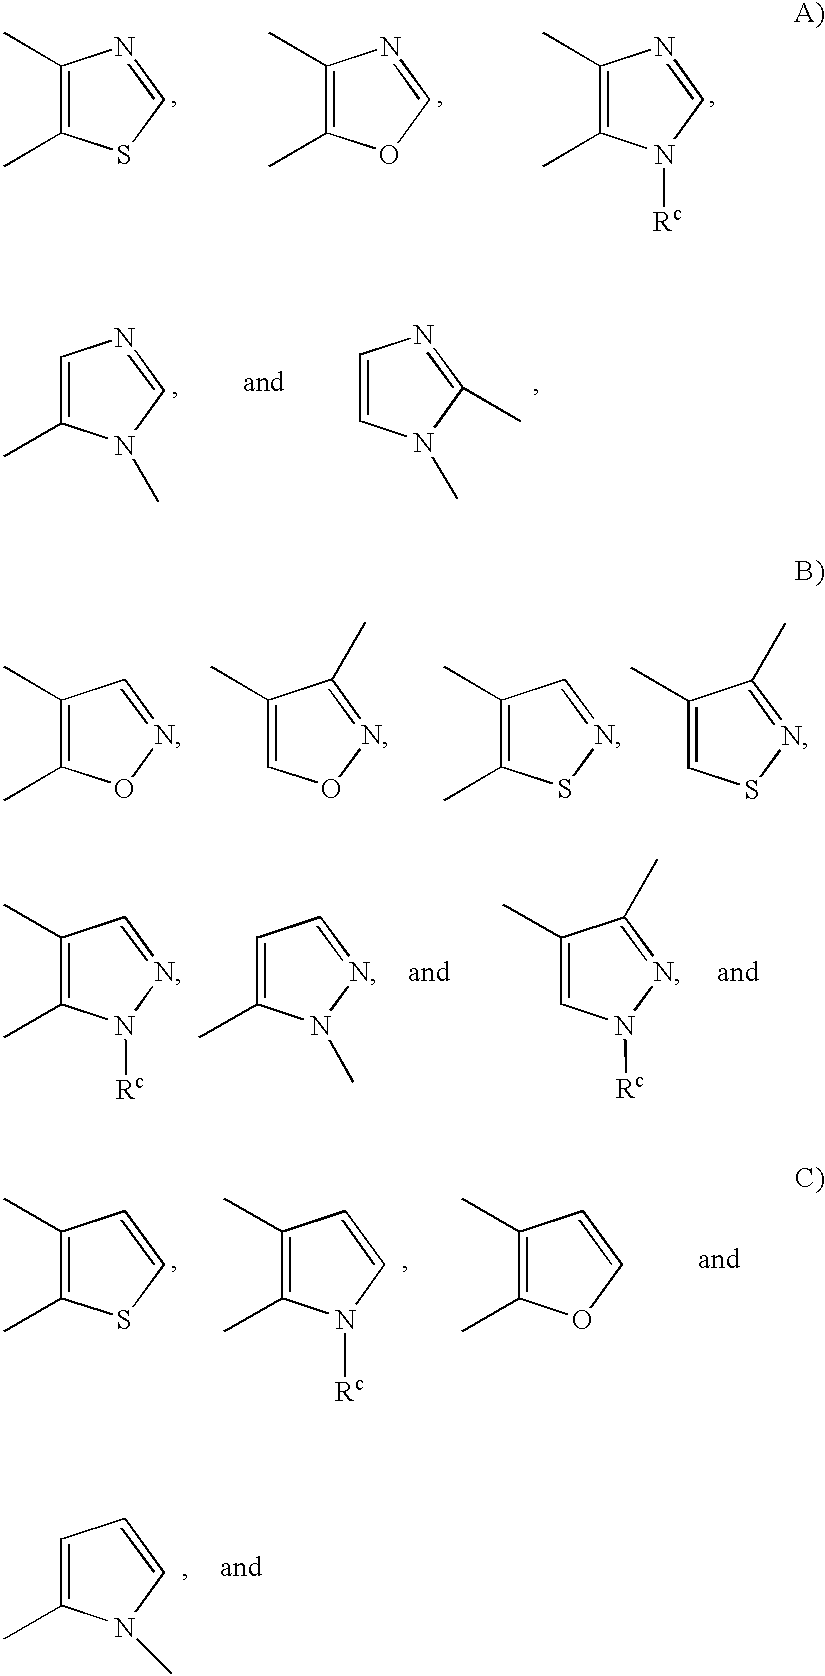 Substituted amine derivatives and methods of use